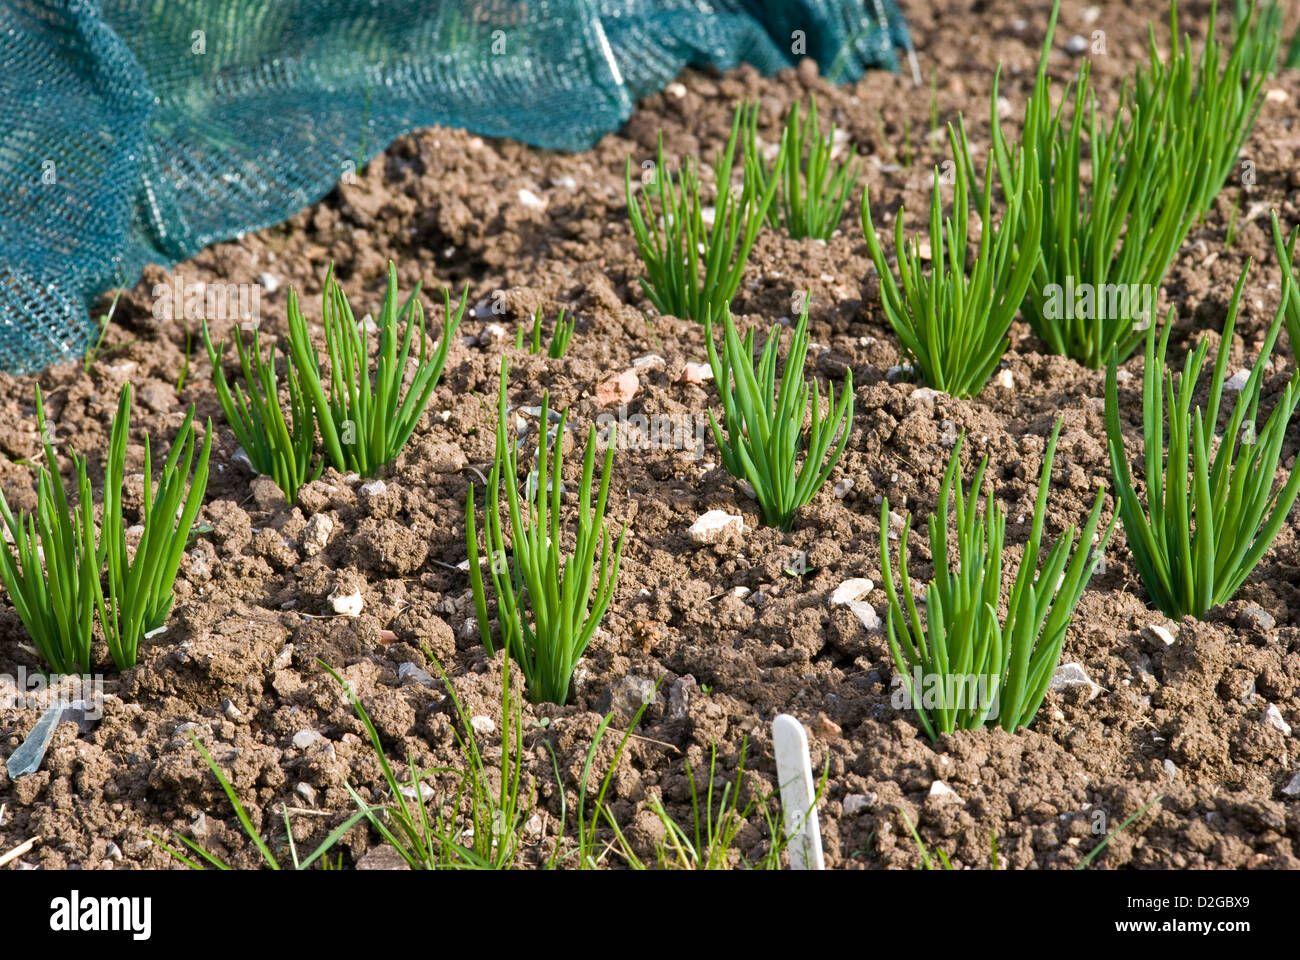 Shallot seedlings about 4 inches high in garden Stock Photo